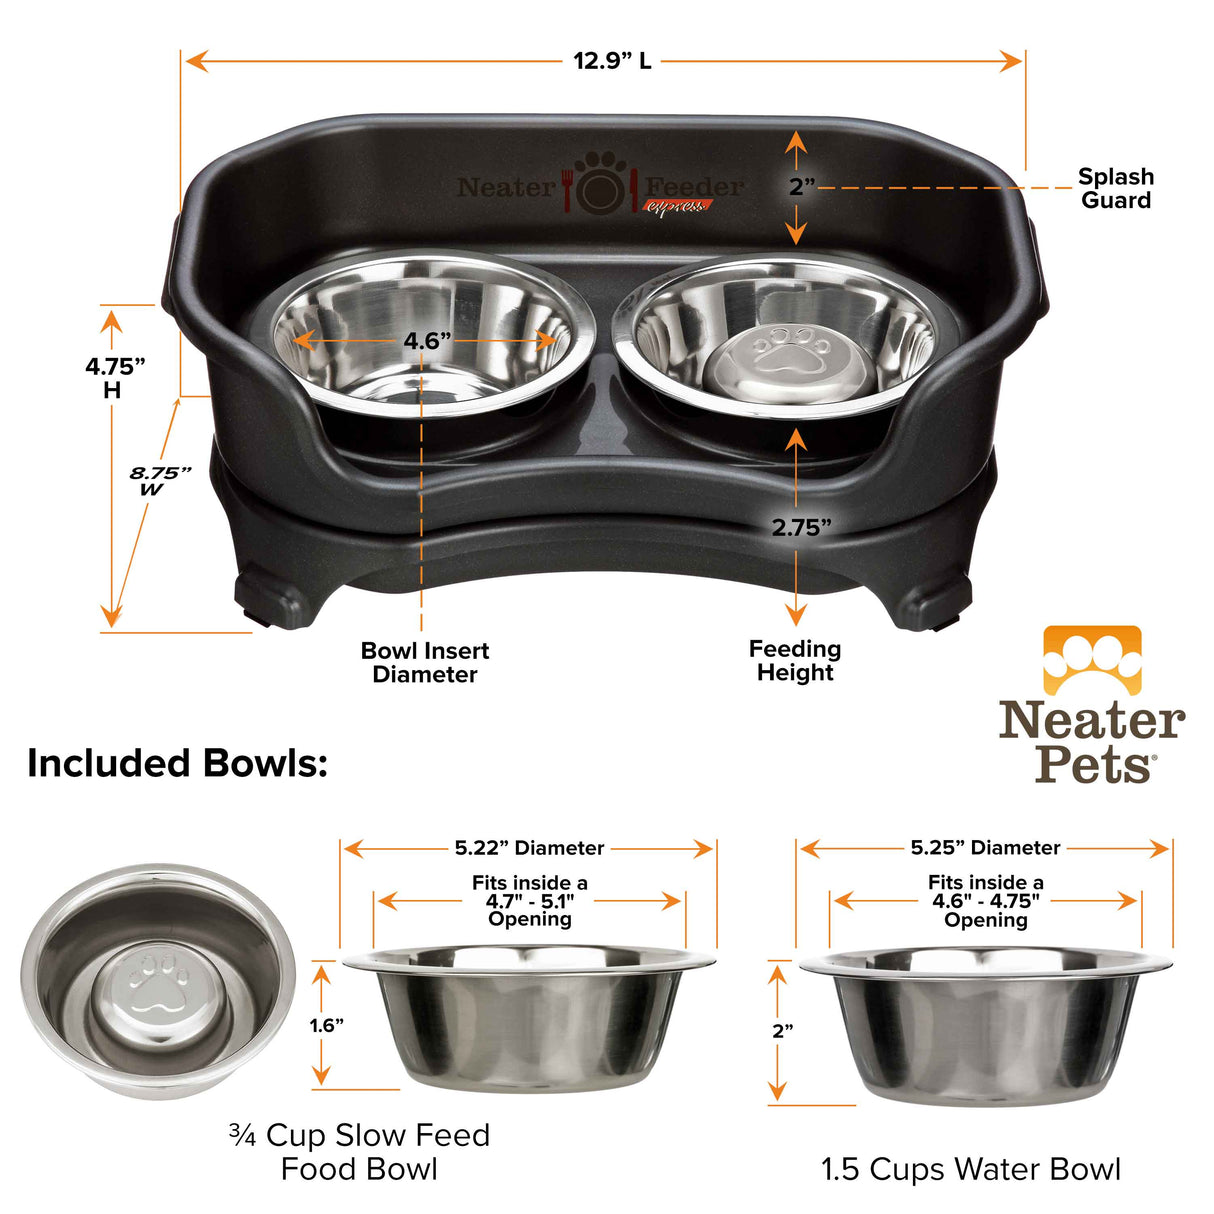 Dimensions of cat to small dog Midnight Black EXPRESS Neater Feeder, 3/4 cup Stainless Steel Slow Feed Bowl, and 1.5 cup water bowl